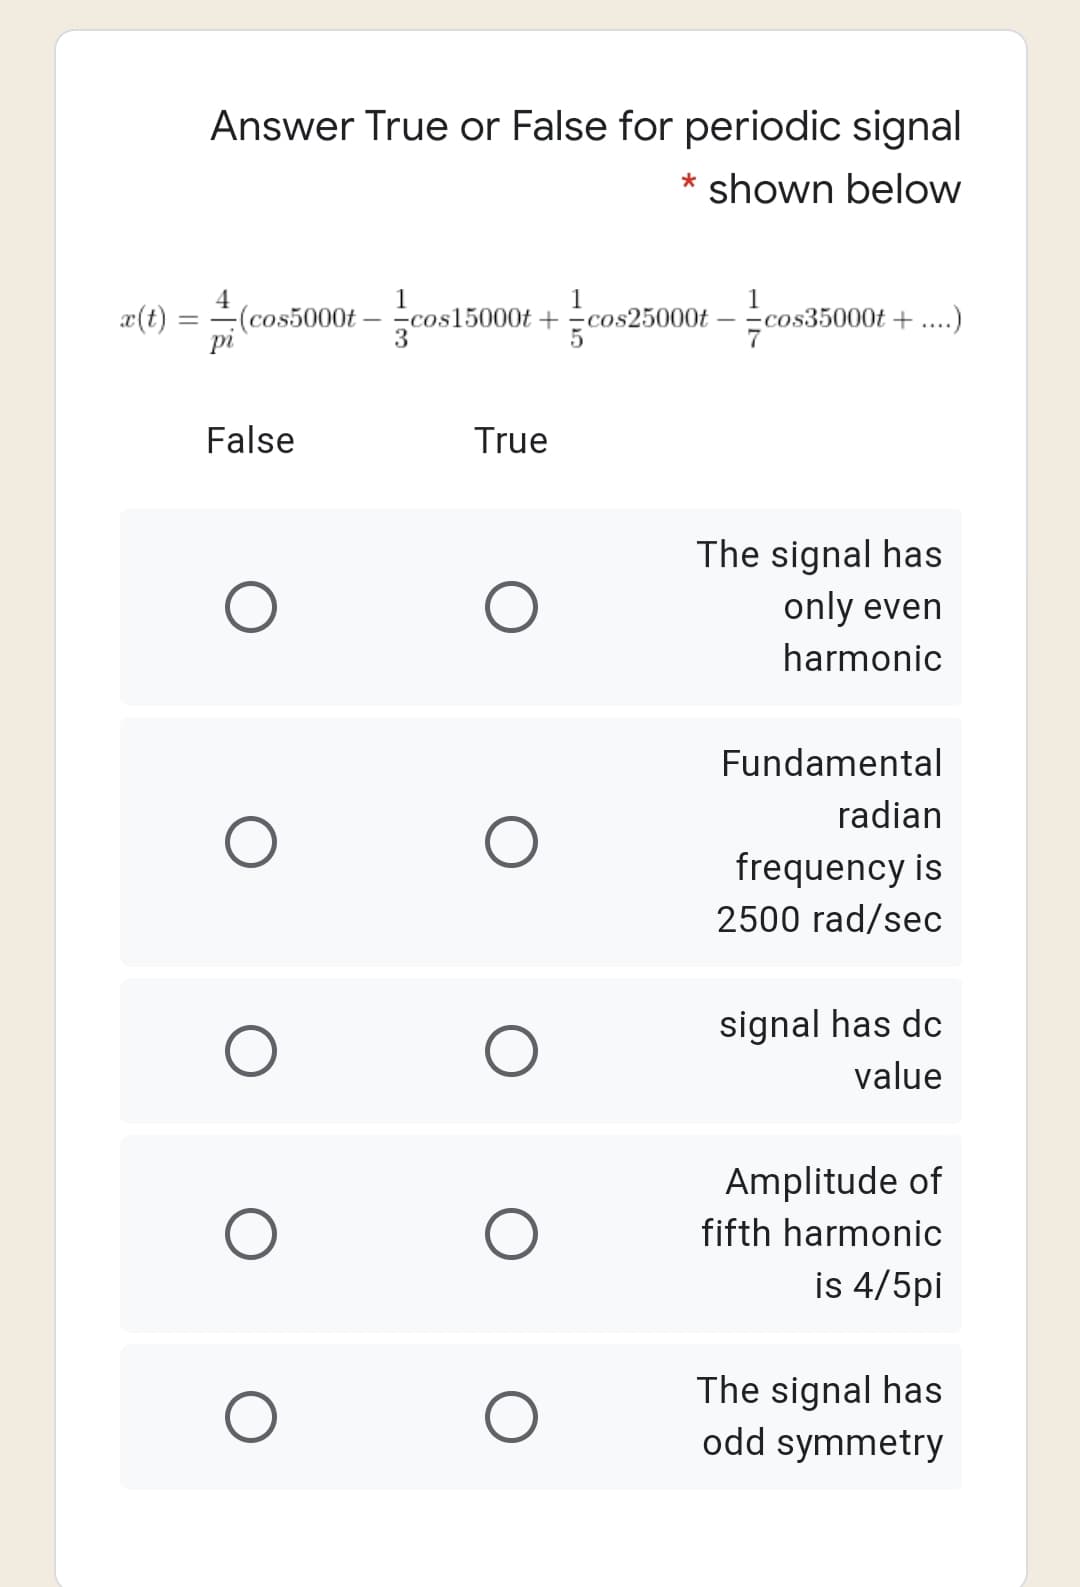 Answer True or False for periodic signal
shown below
4
1
cos15000t +=cos25000t
1
æ(t) =
(cos5000t
– cos35000t + ....)
pi
False
True
The signal has
only even
harmonic
Fundamental
radian
frequency is
2500 rad/sec
signal has dc
value
Amplitude of
fifth harmonic
is 4/5pi
The signal has
odd symmetry
